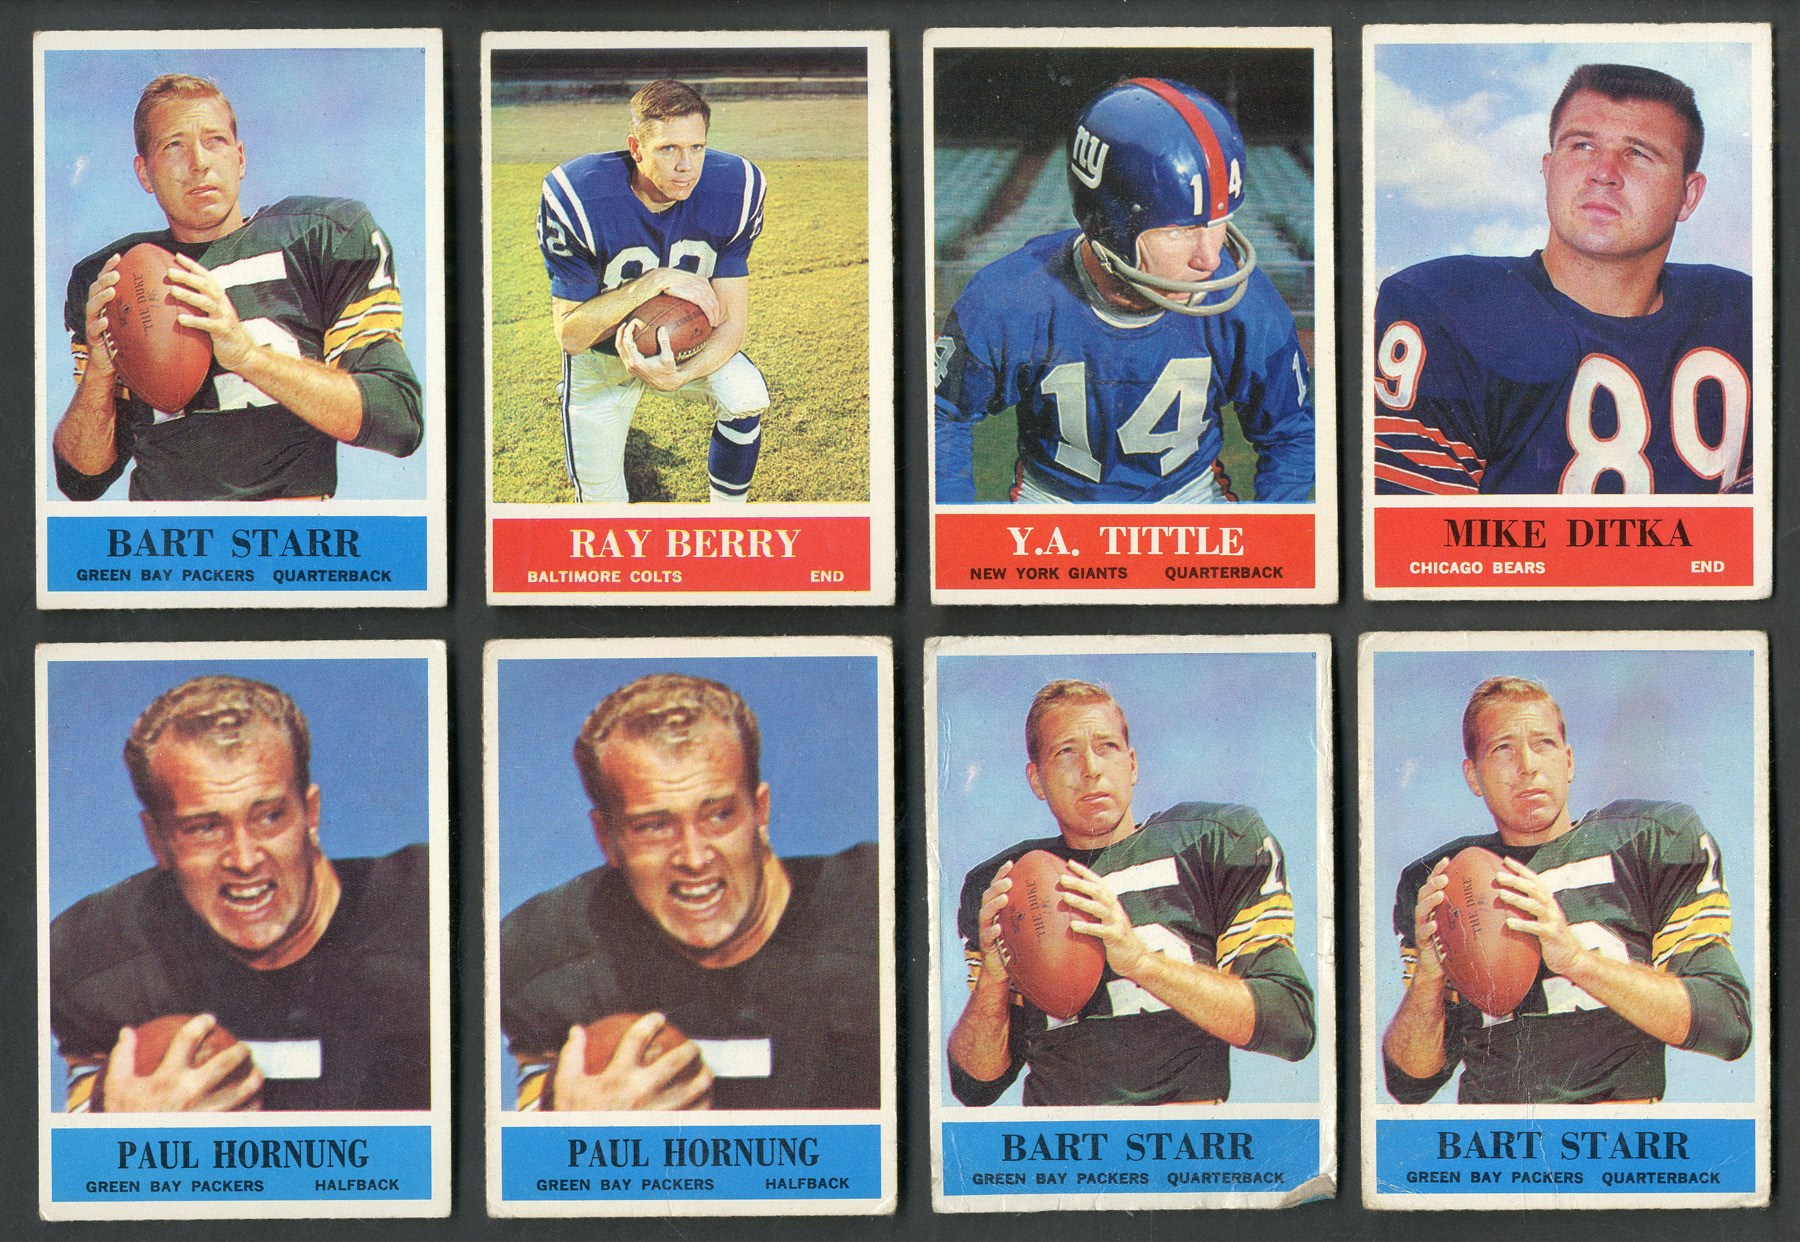 Baseball and Trading Cards - 1964 Topps & Philadelphia Gum Football Near Complete and Partial Sets with Stars (185+ Cards)